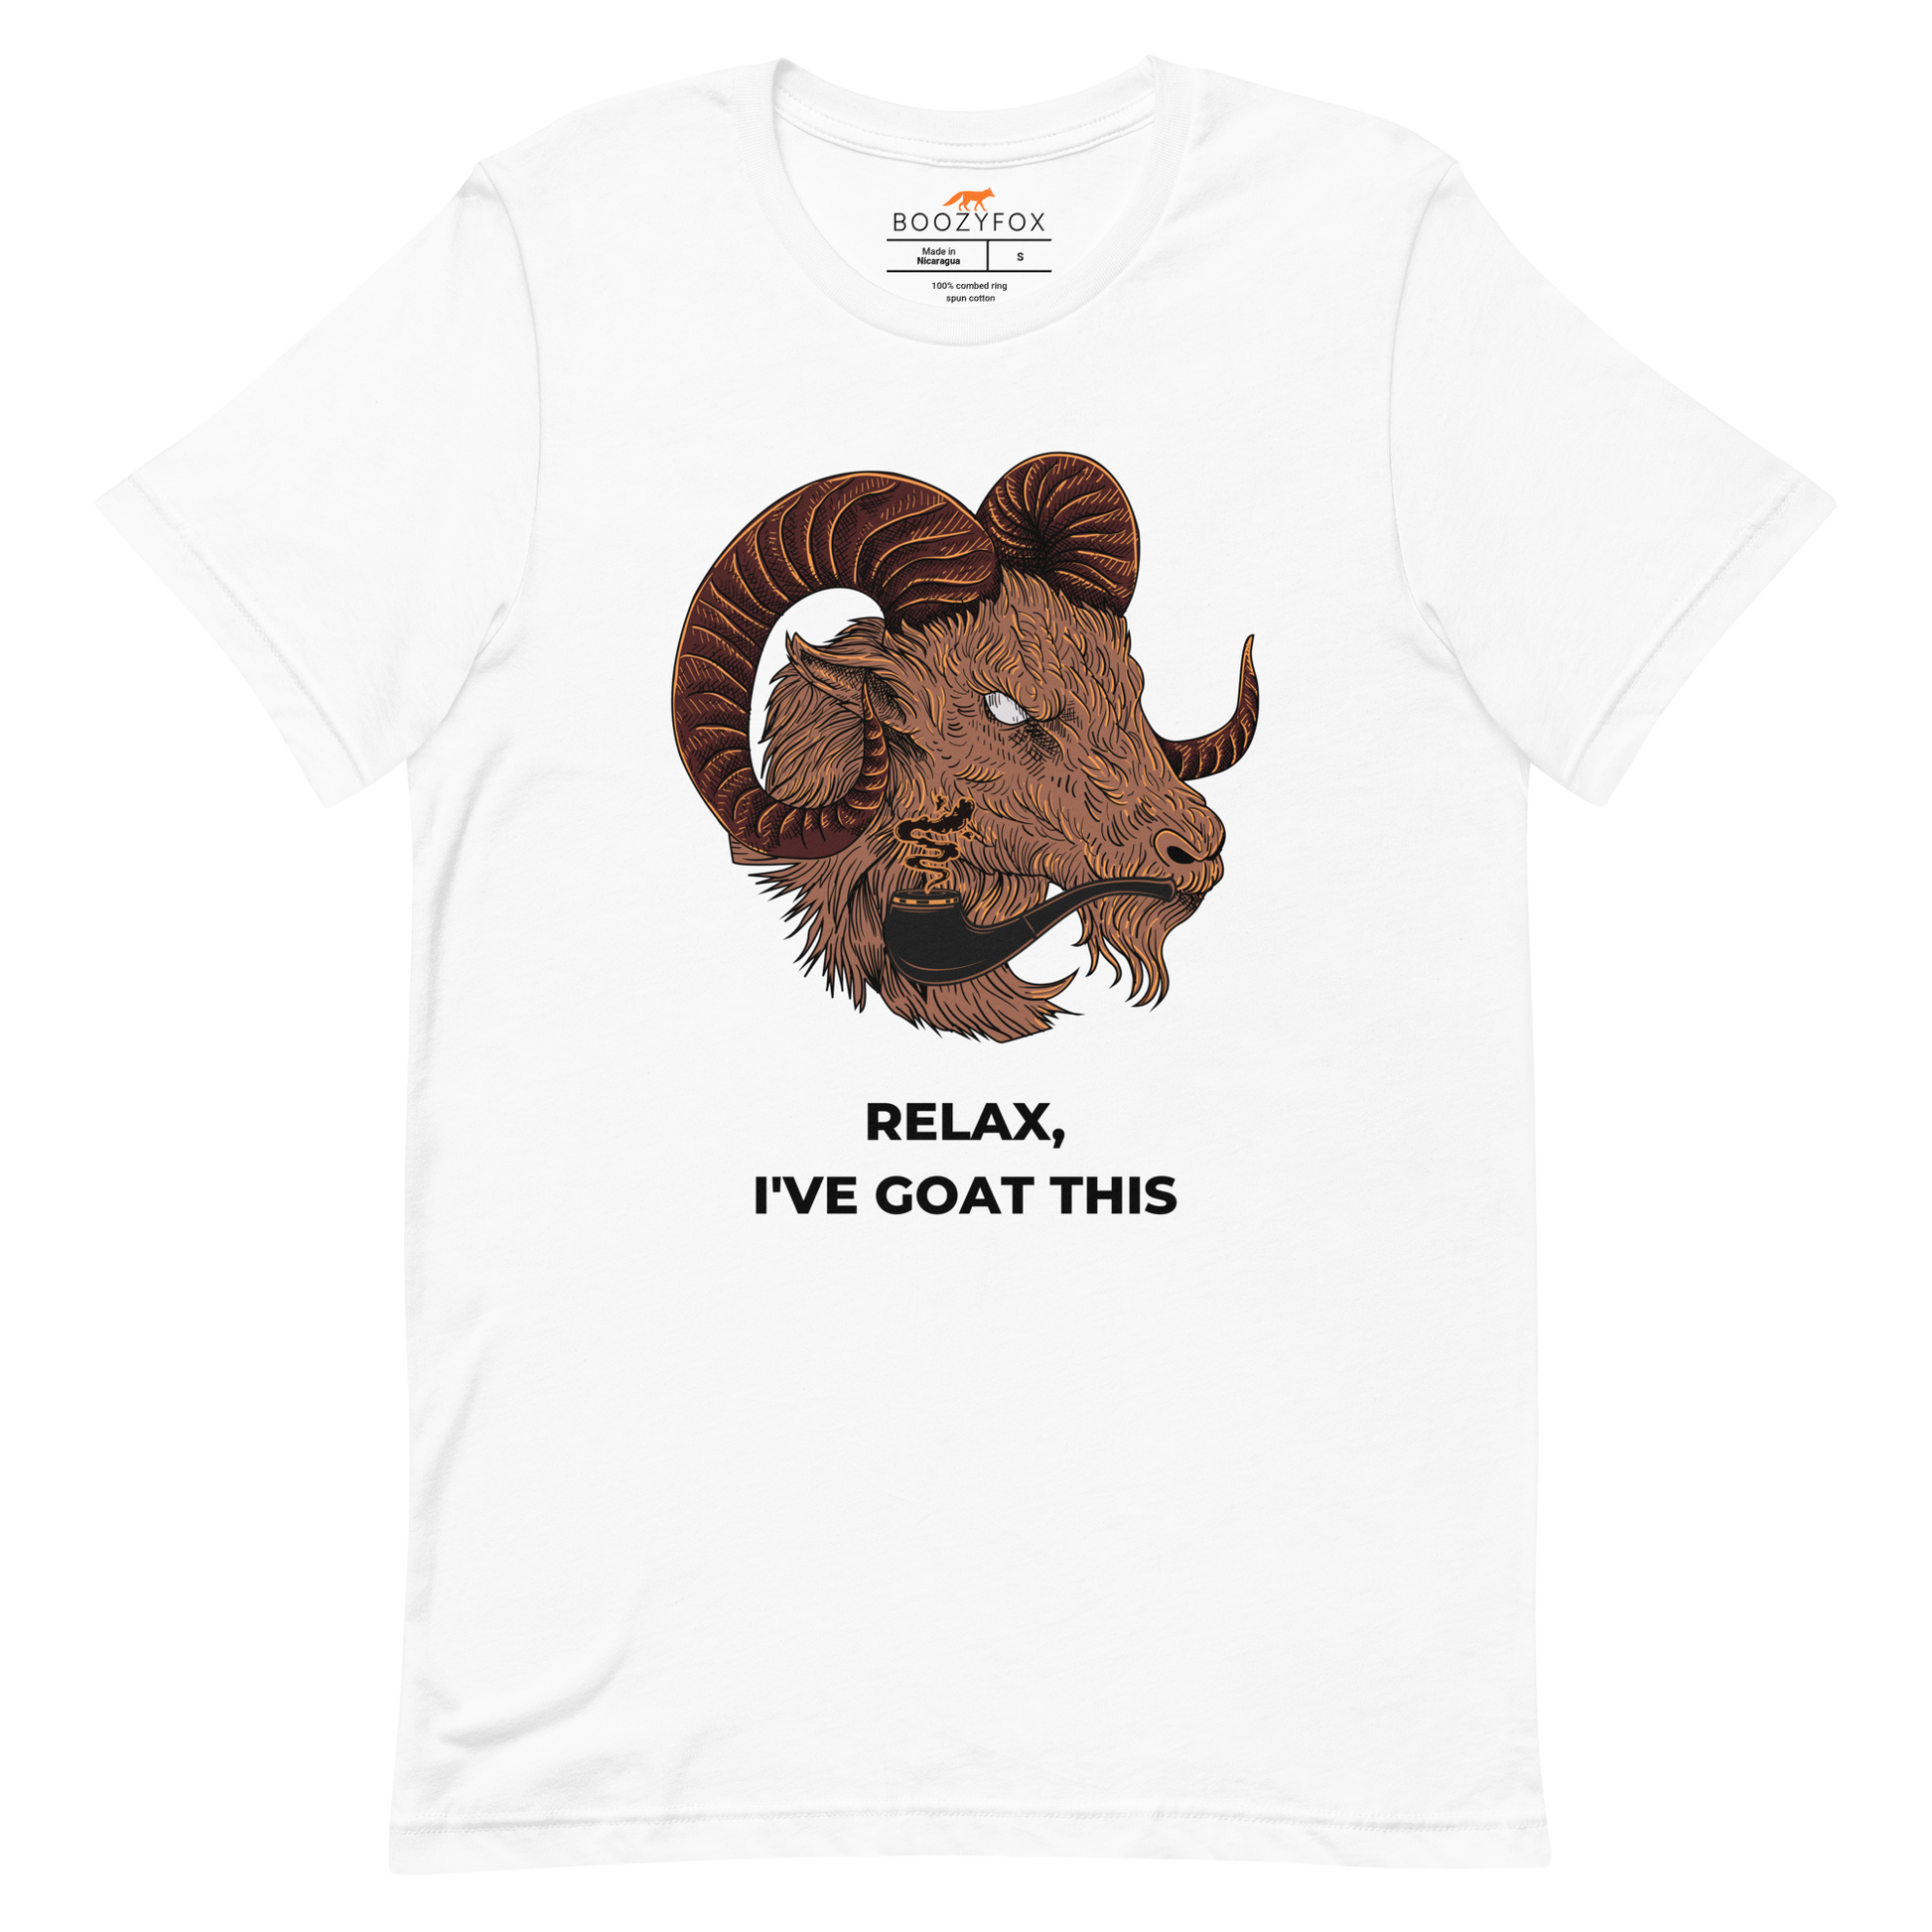 White Premium Goat T-Shirt featuring an amusing Relax I've Goat This graphic on the chest - Funny Graphic Goat Tees - Boozy Fox